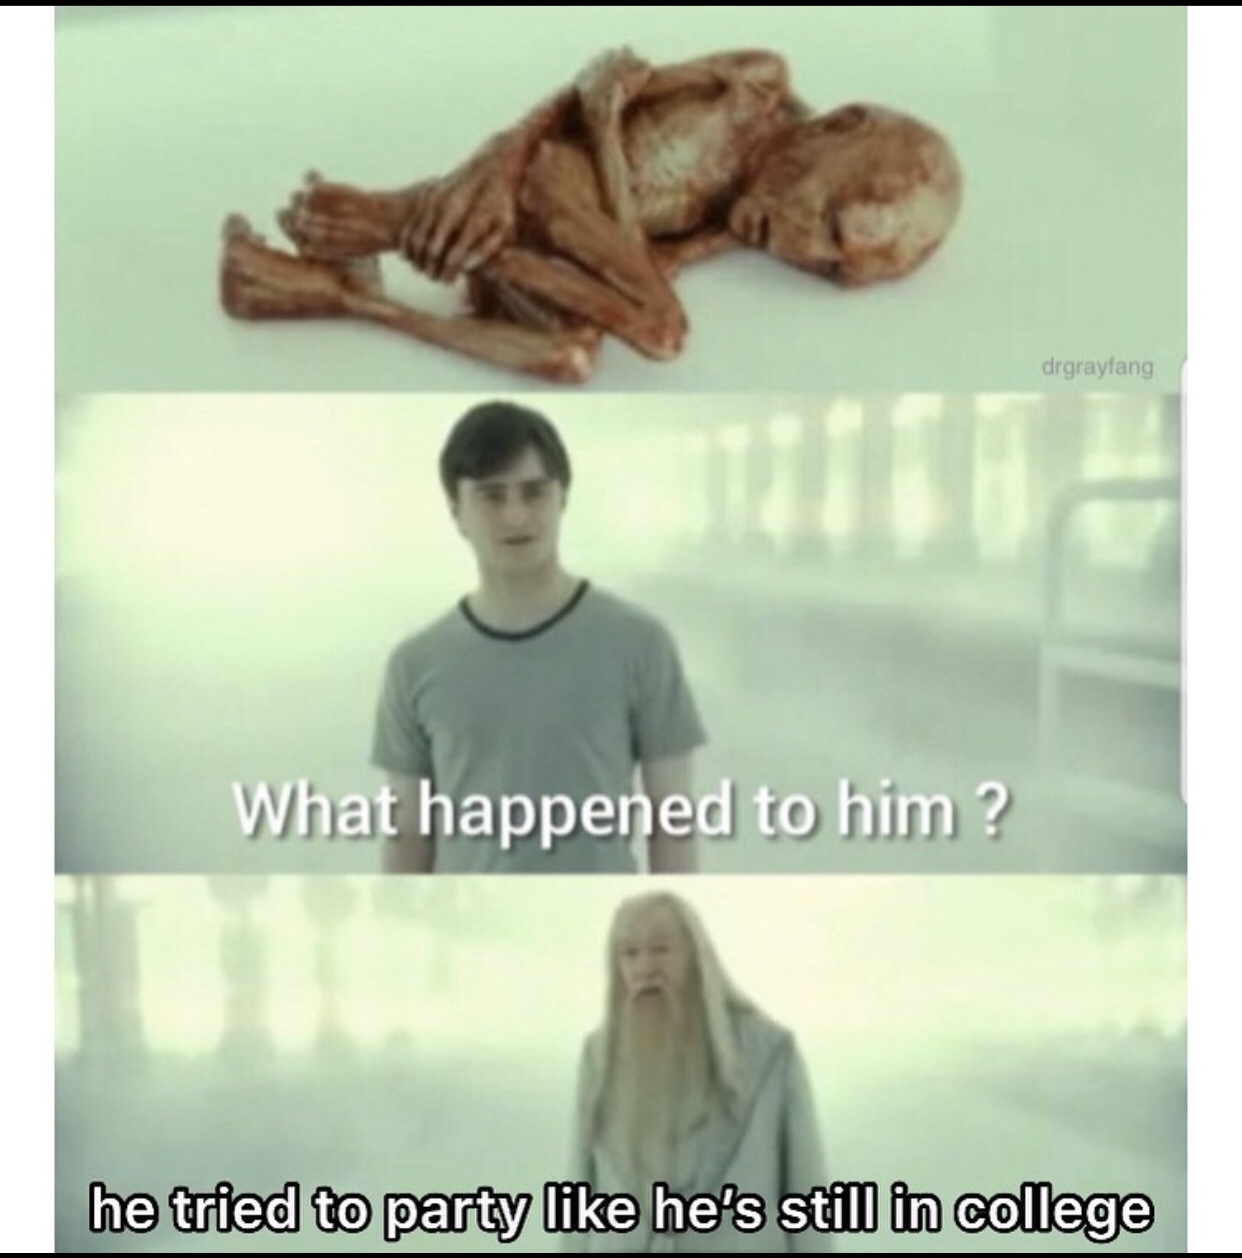 voldemort fetus - drgrayfang What happened to him? he tried to party he's still in college